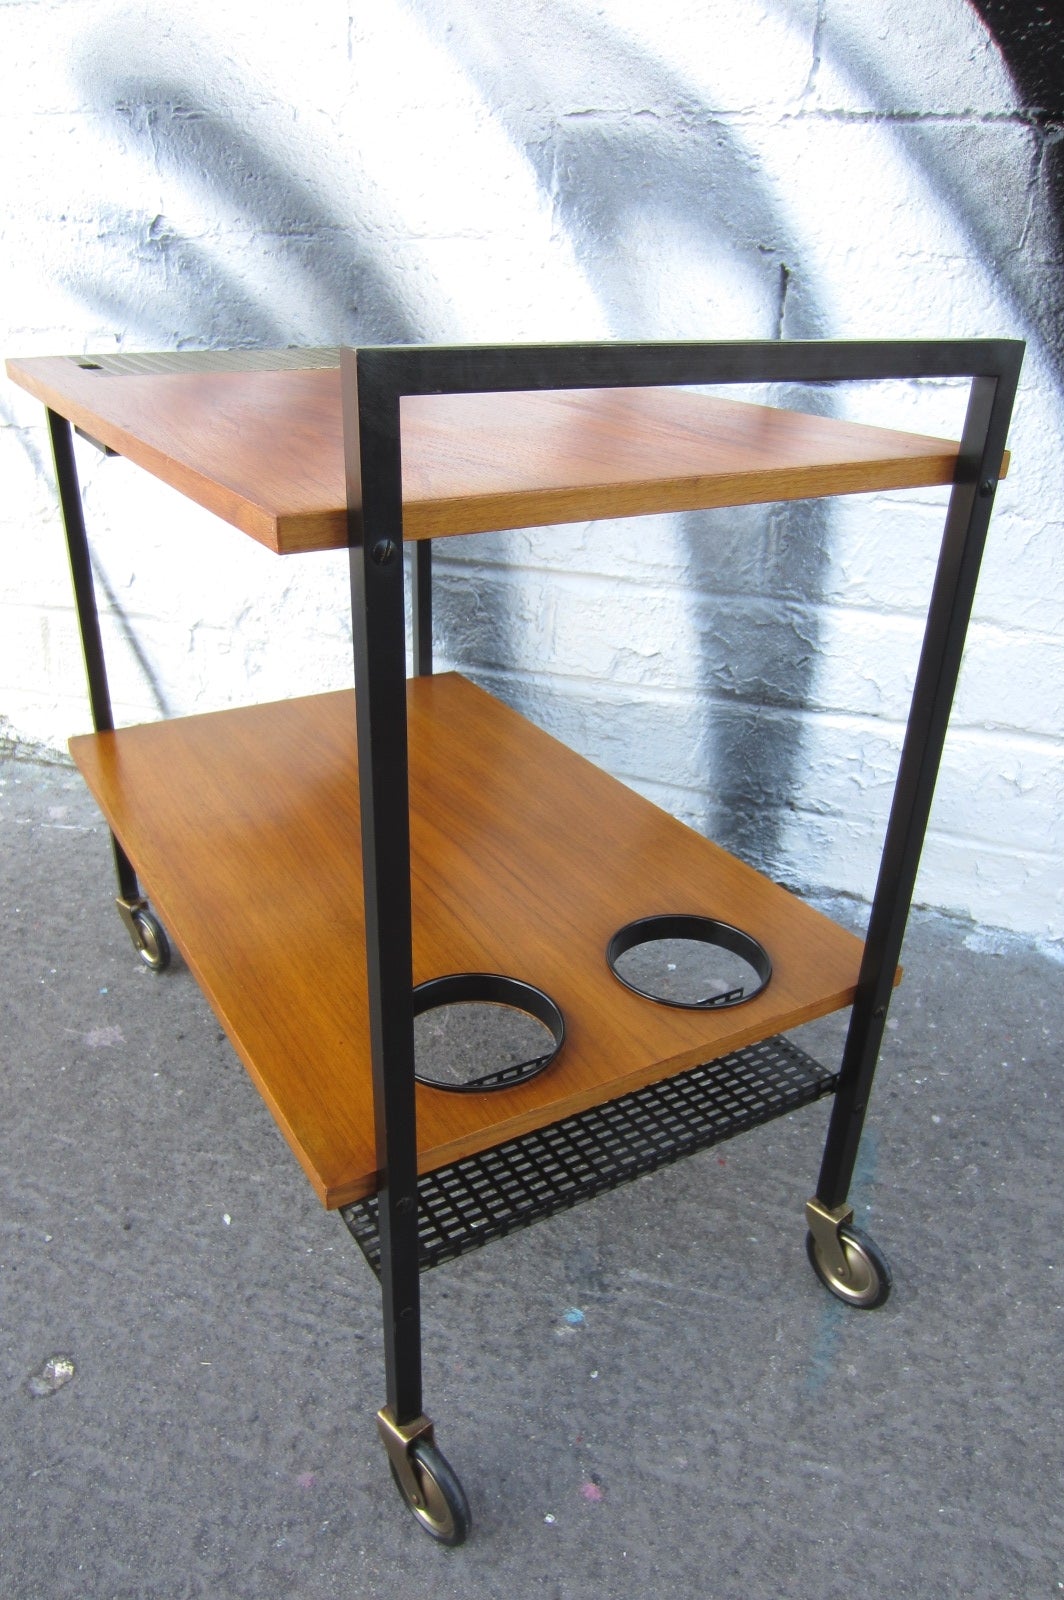 1950s walnut and steel modernist tea cart in beautiful original condition.
Not signed or marked by maker. Similar design style to the works of George Nelson.
Super nice quality construction. Petite size.